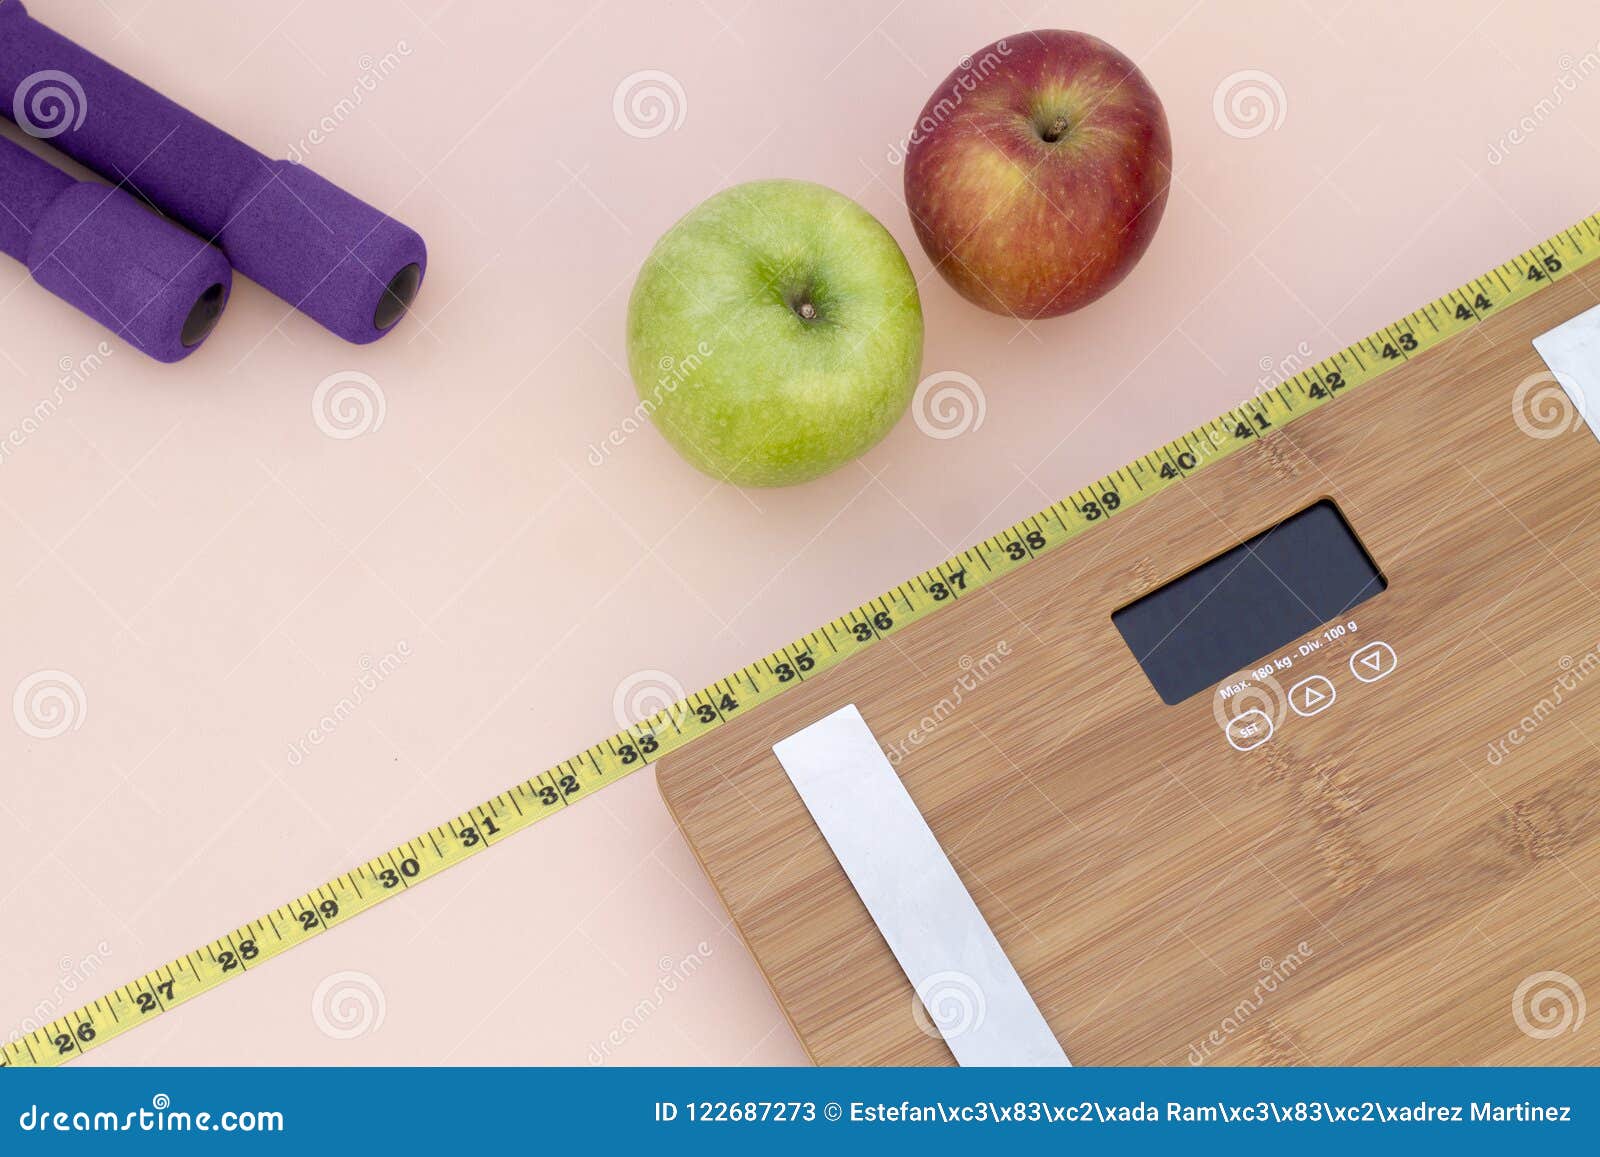 still life photography with apples, weight tape measure and a scale